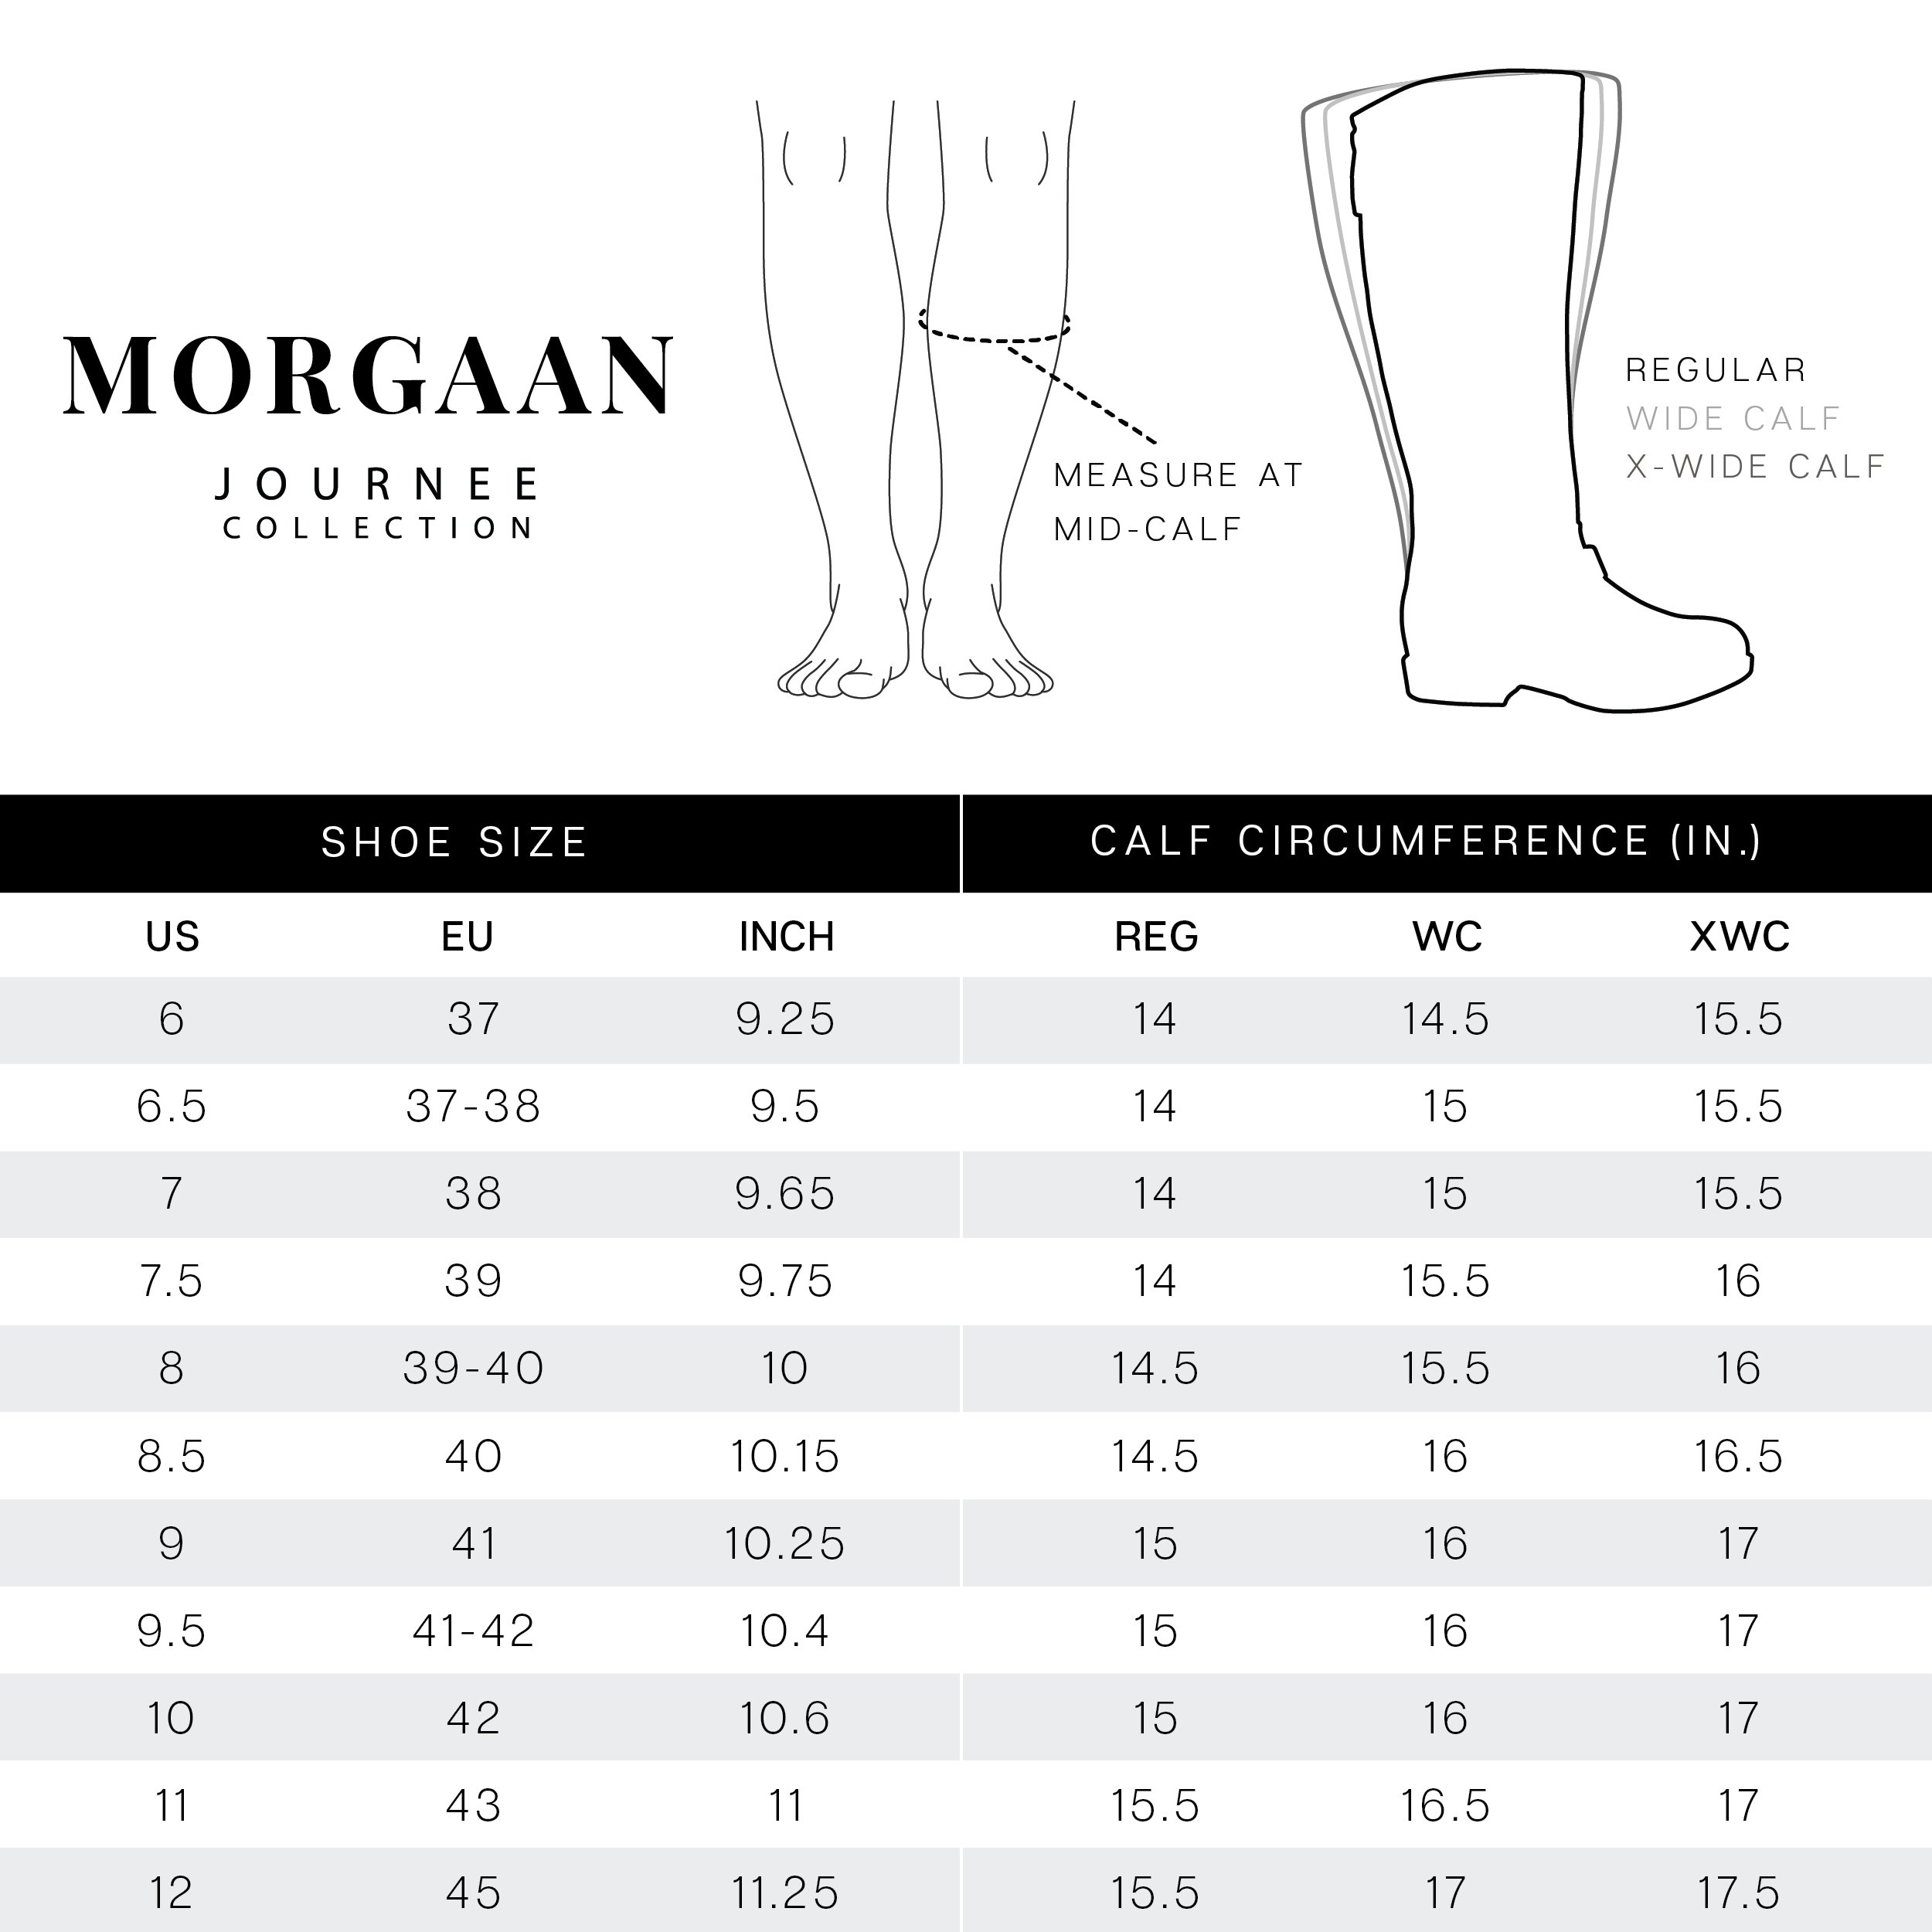 MORGAAN EXTRA WIDE CALF - Journee Collection